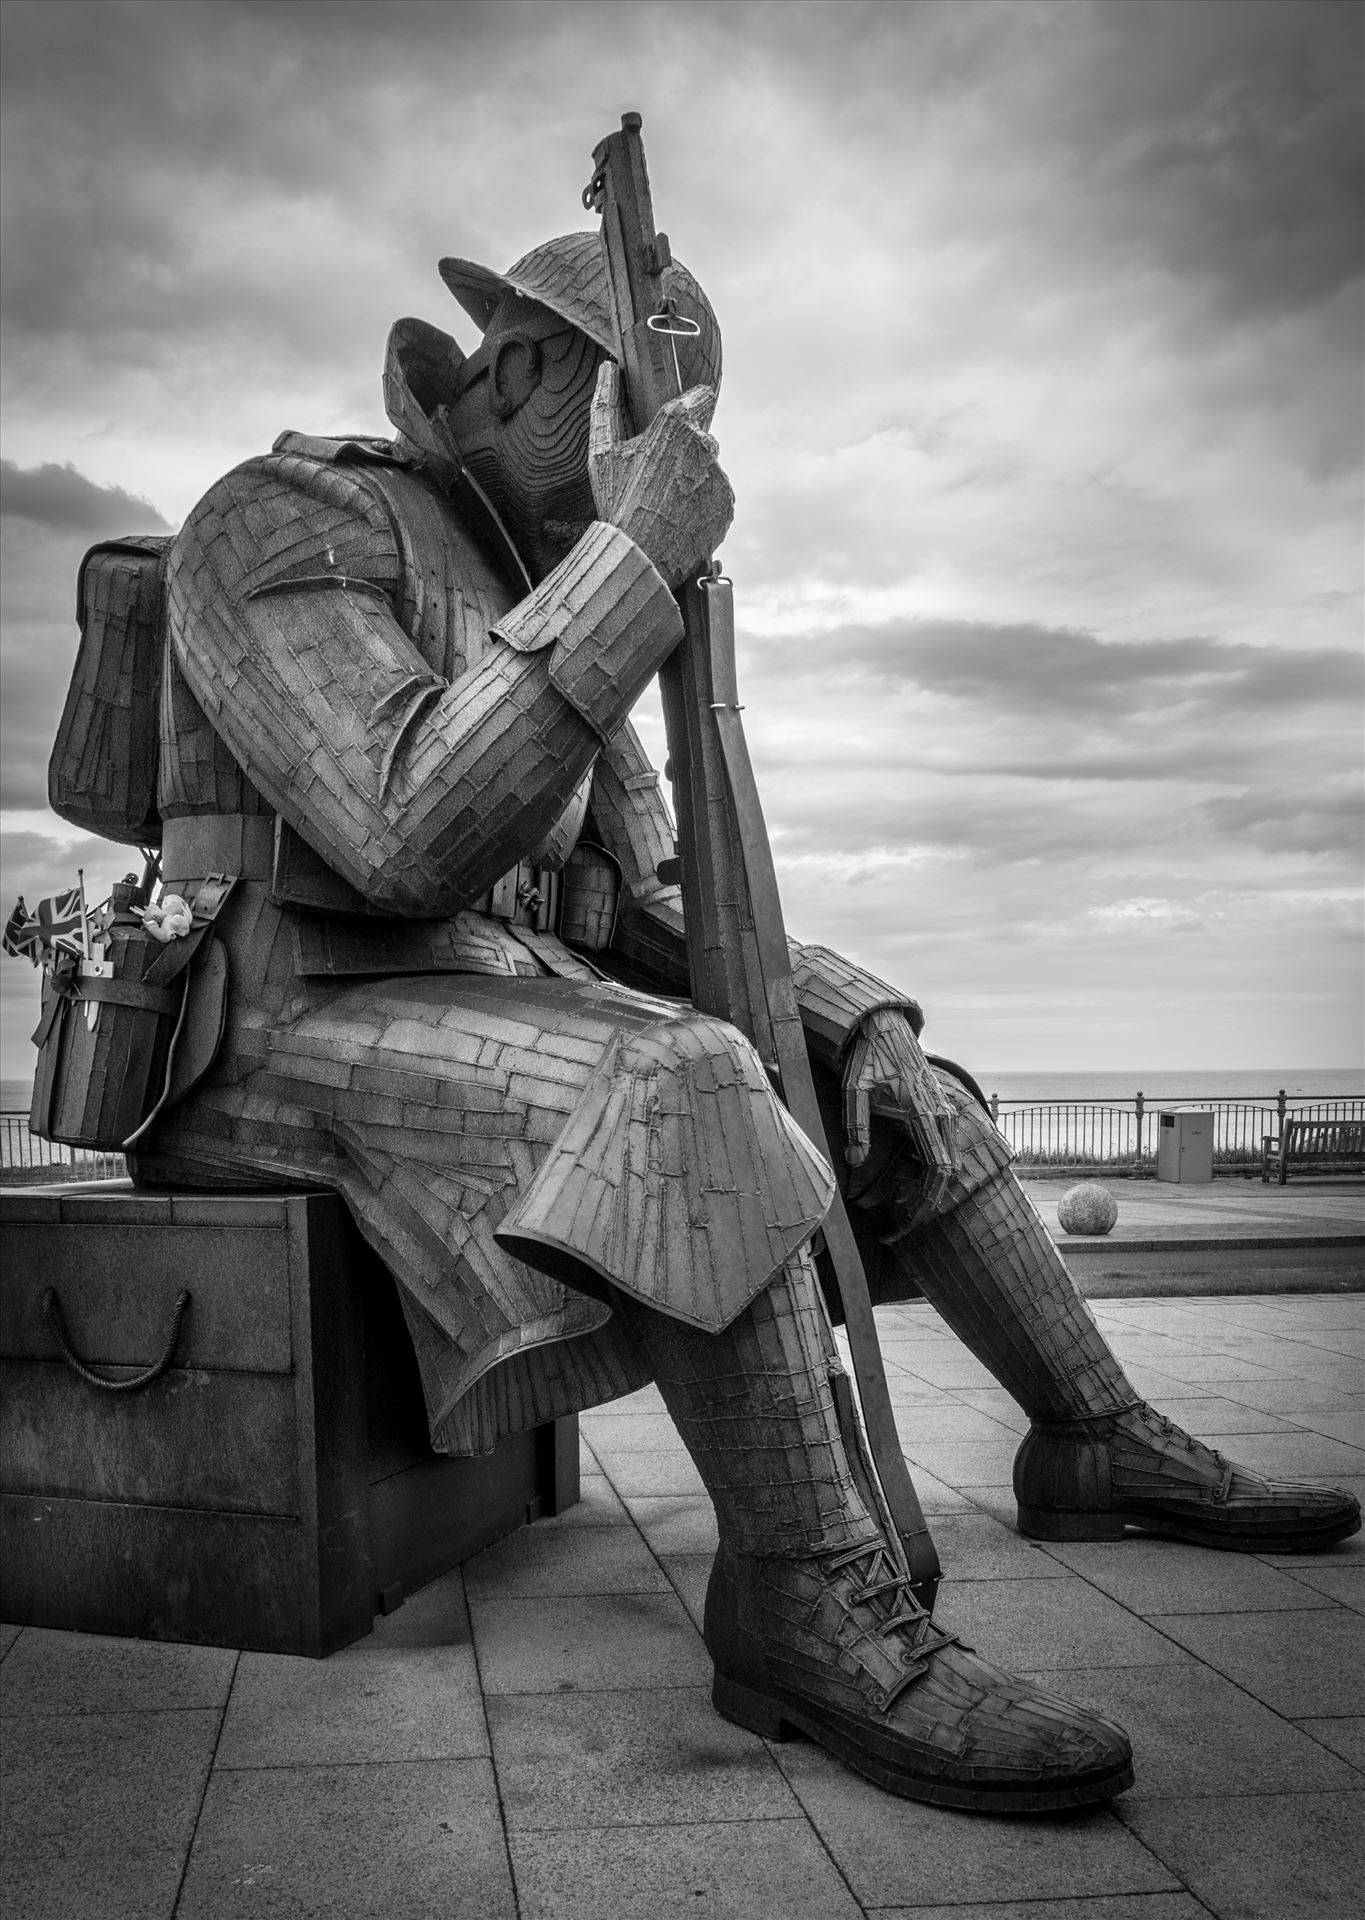 'Tommy' aka 1101The steel statue weighs 1.2 tonnes, and is 9 feet 5 inches tall. Depicting a WW1 soldier, wearing full uniform, sitting on an ammunition box. Referring to Archetype Tommy Atkins. '1101' refers to the 1st minute of peace in 1918.